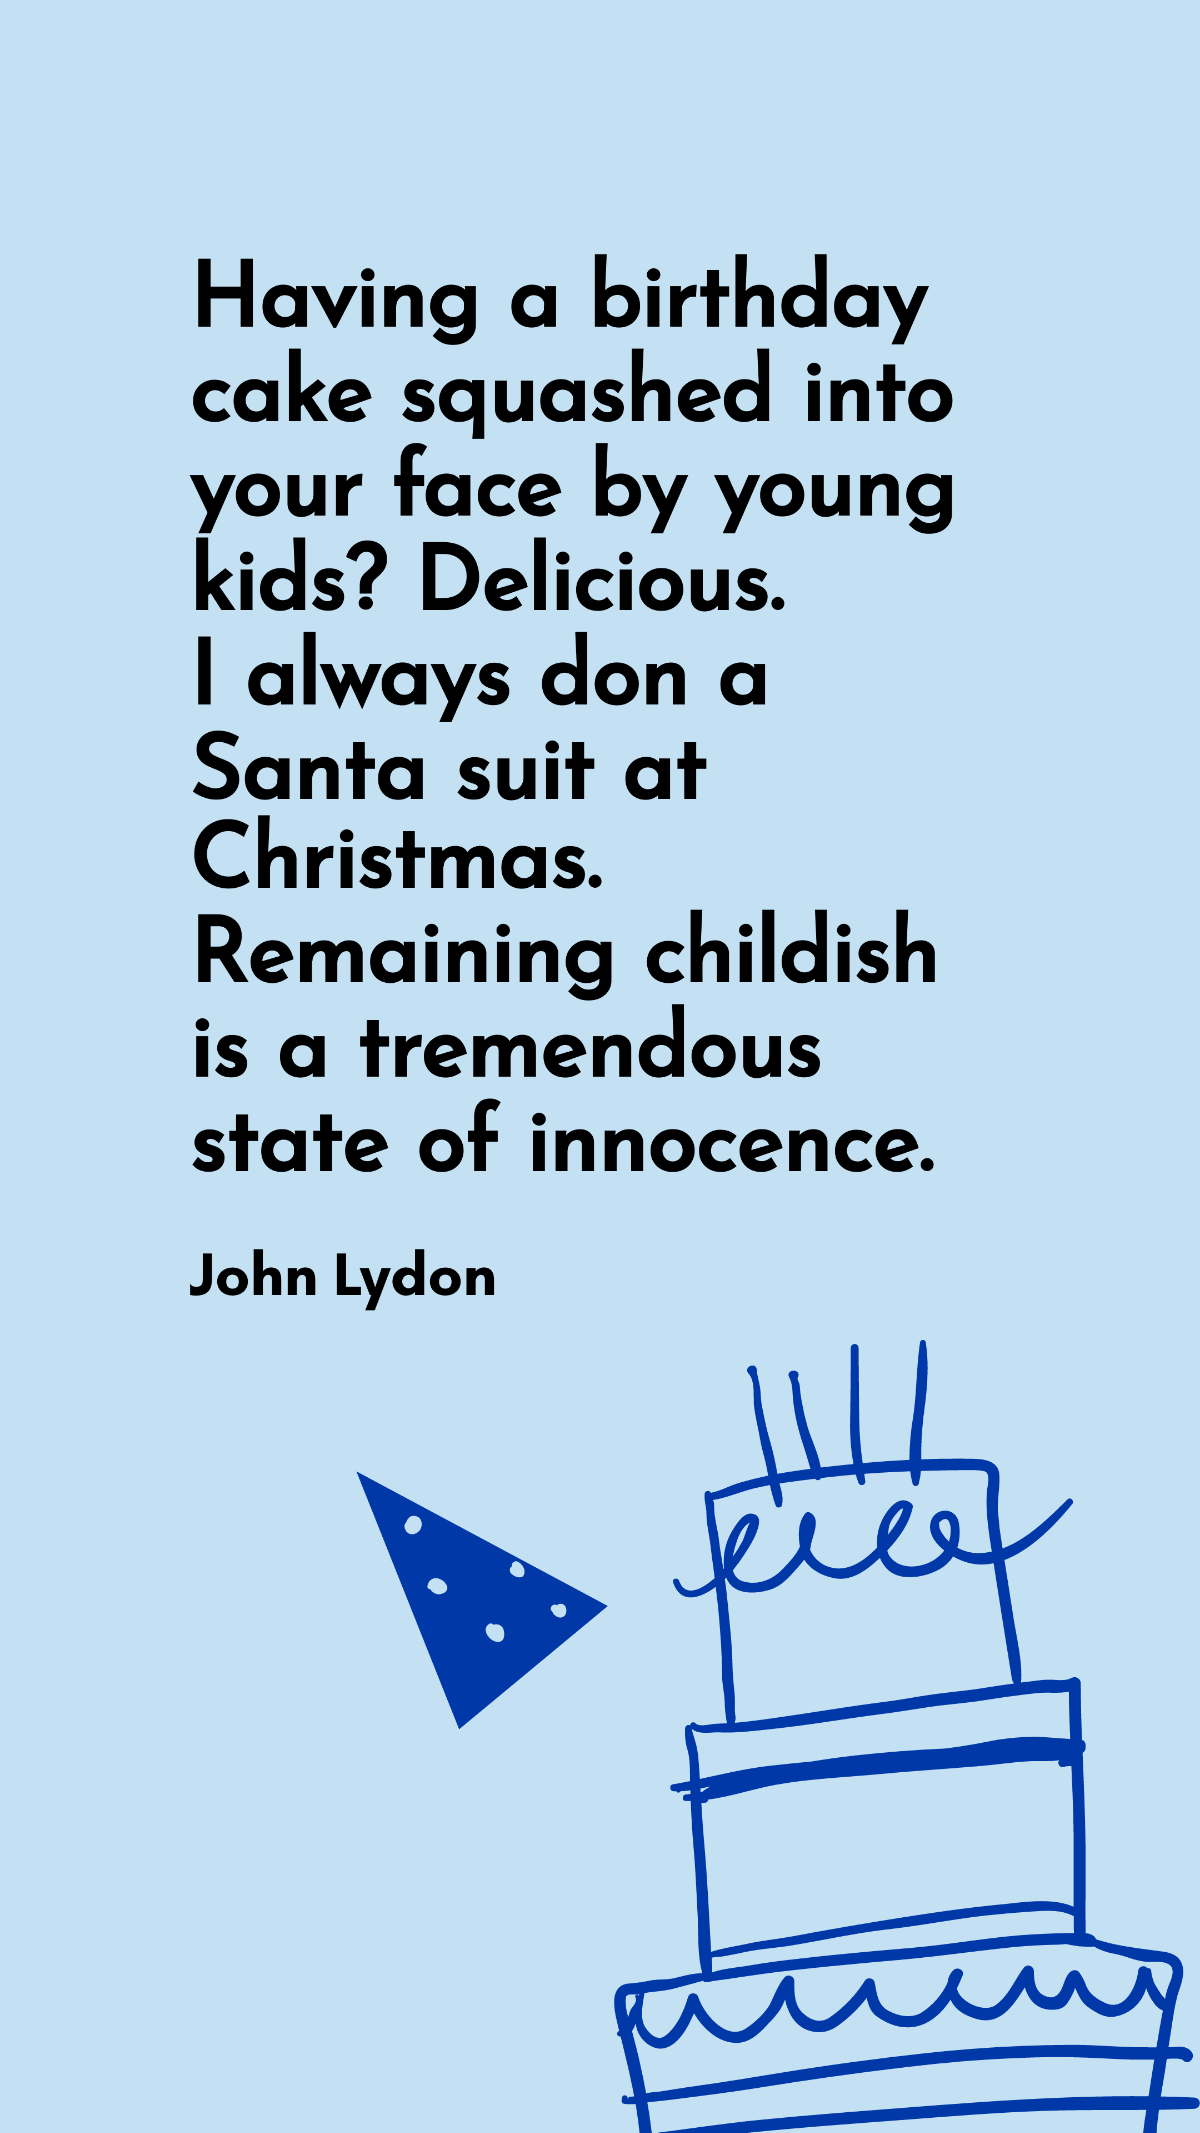 John Lydon - Having a birthday cake squashed into your face by young kids? Delicious. I always don a Santa suit at Christmas. Remaining childish is a tremendous state of innocence.